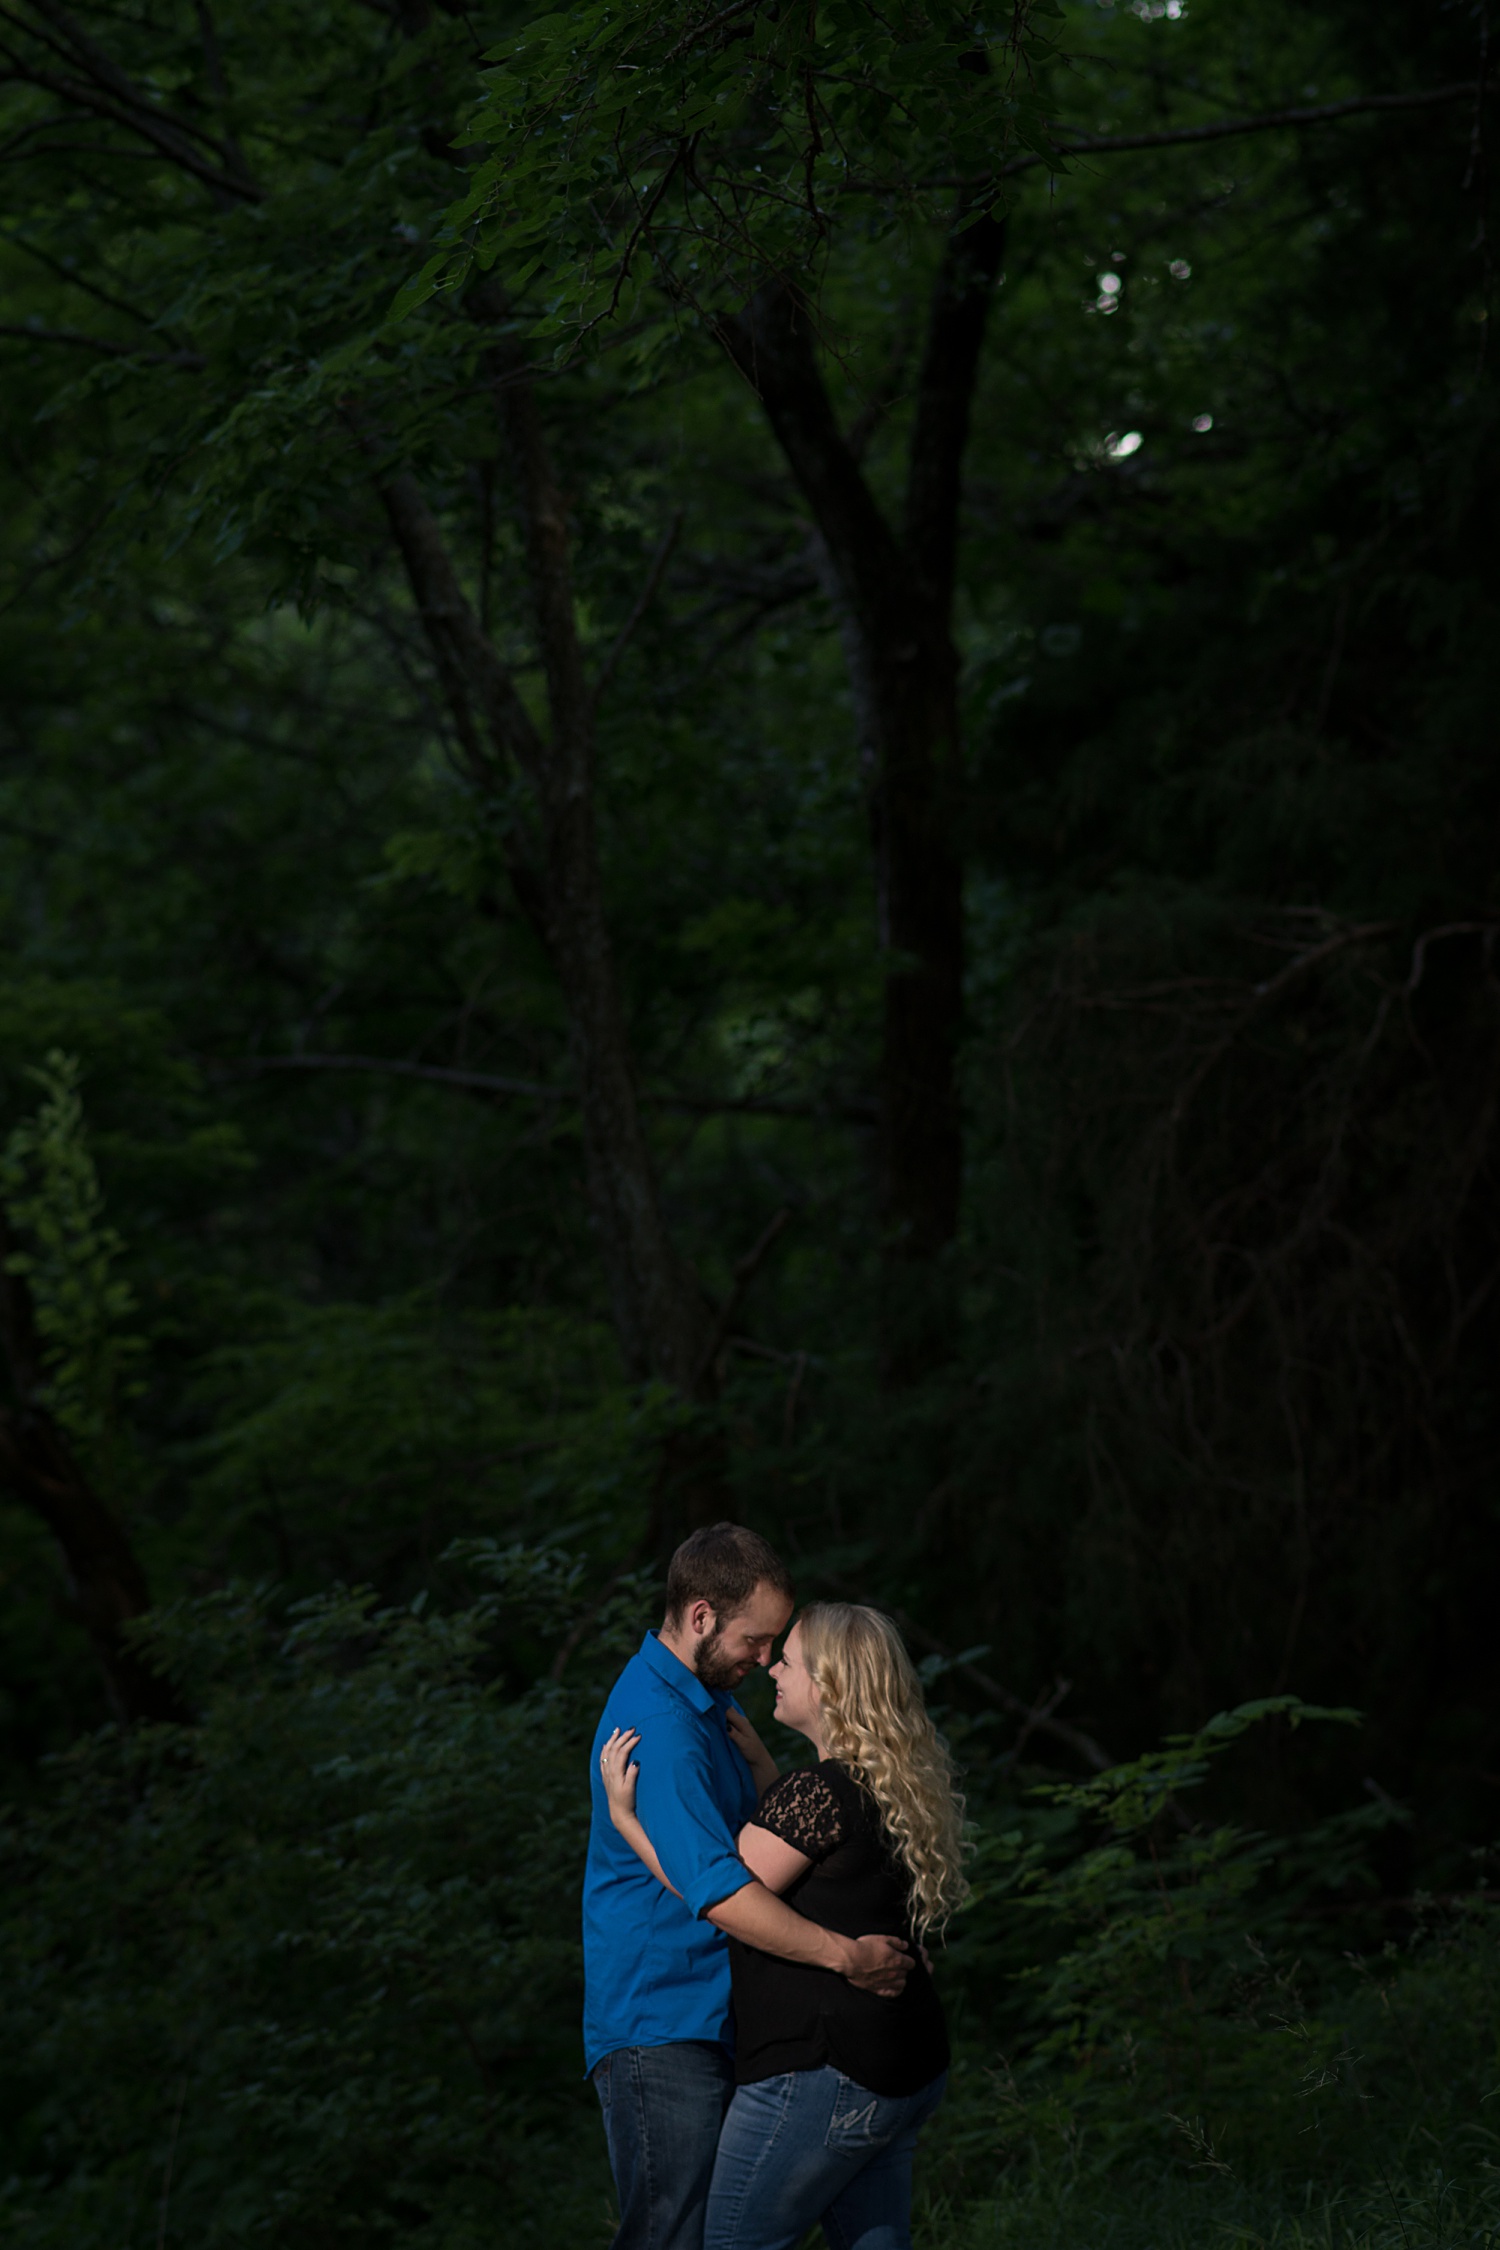 Engagement session at Clinton Lake in the trees